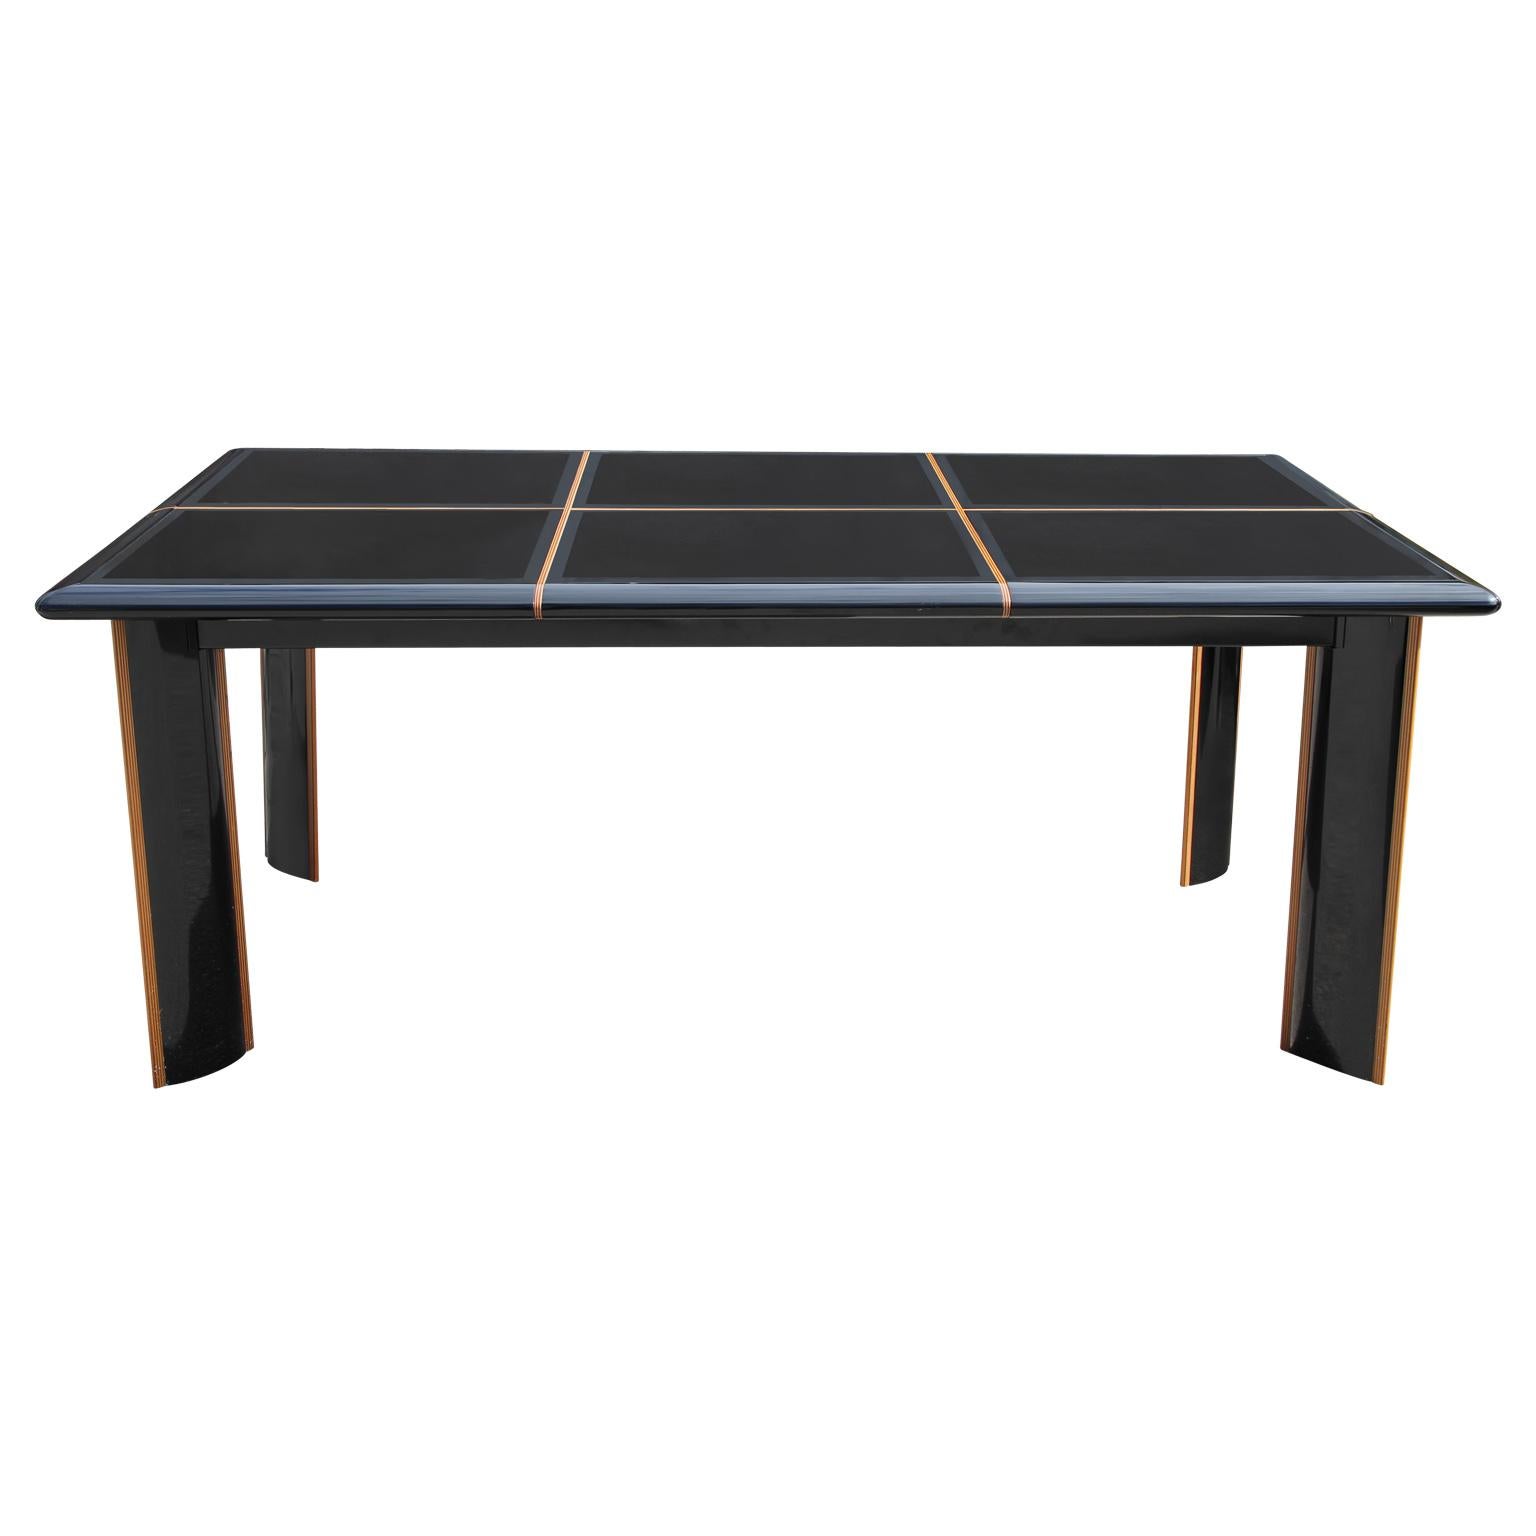 Postmodern Roche Bobois for Pierre Cardin Italian high gloss black lacquer dining table. In beautiful condition. Has one leaf. 

Dimensions of Table Without the Leaf: H 30 in. x W 74 in. x D 39 in. 